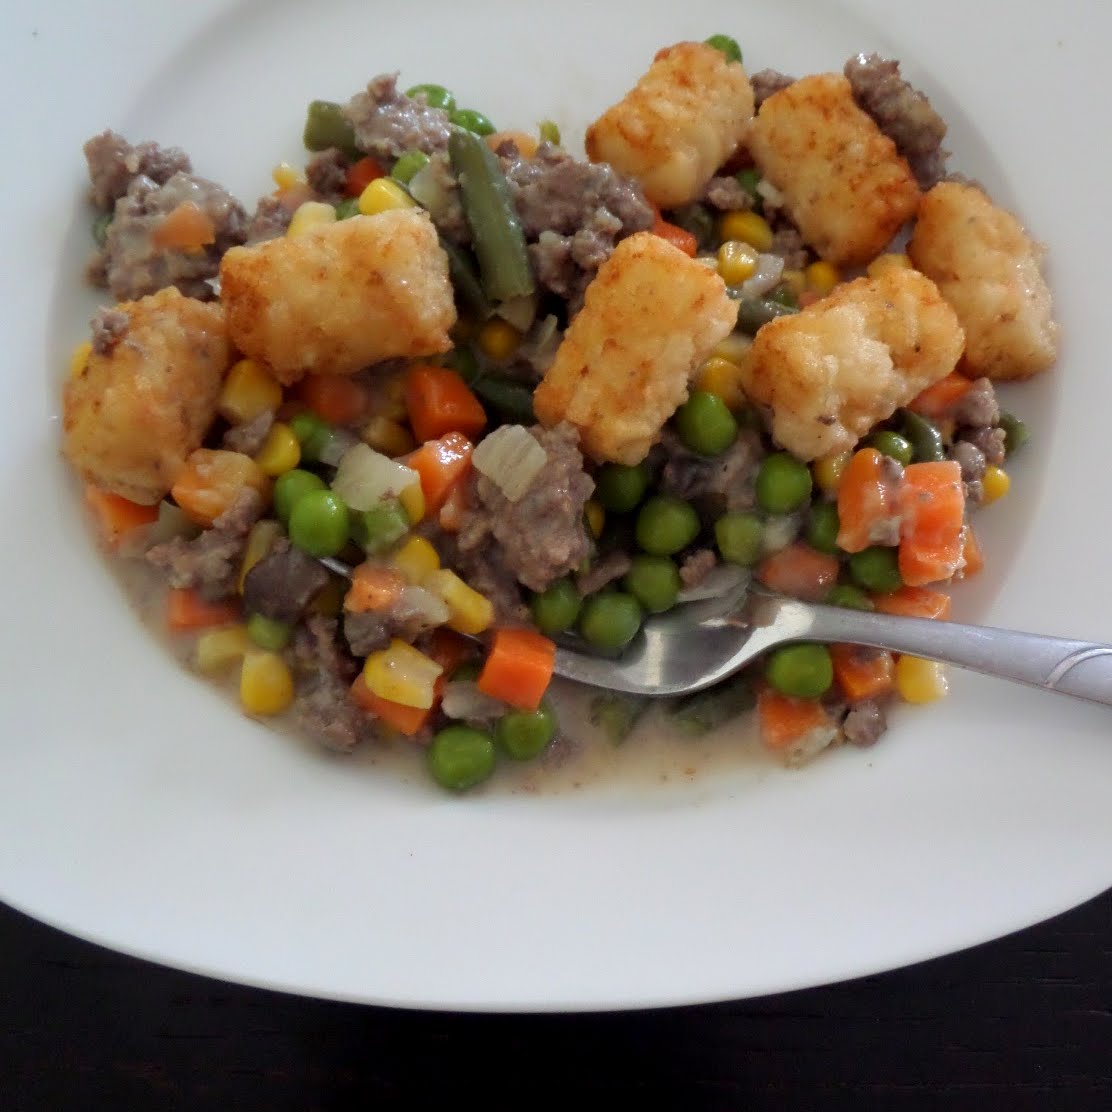 Tater Tot Hotdish:  Ground beef and veggies in a creamy sauce topped with tater tots.